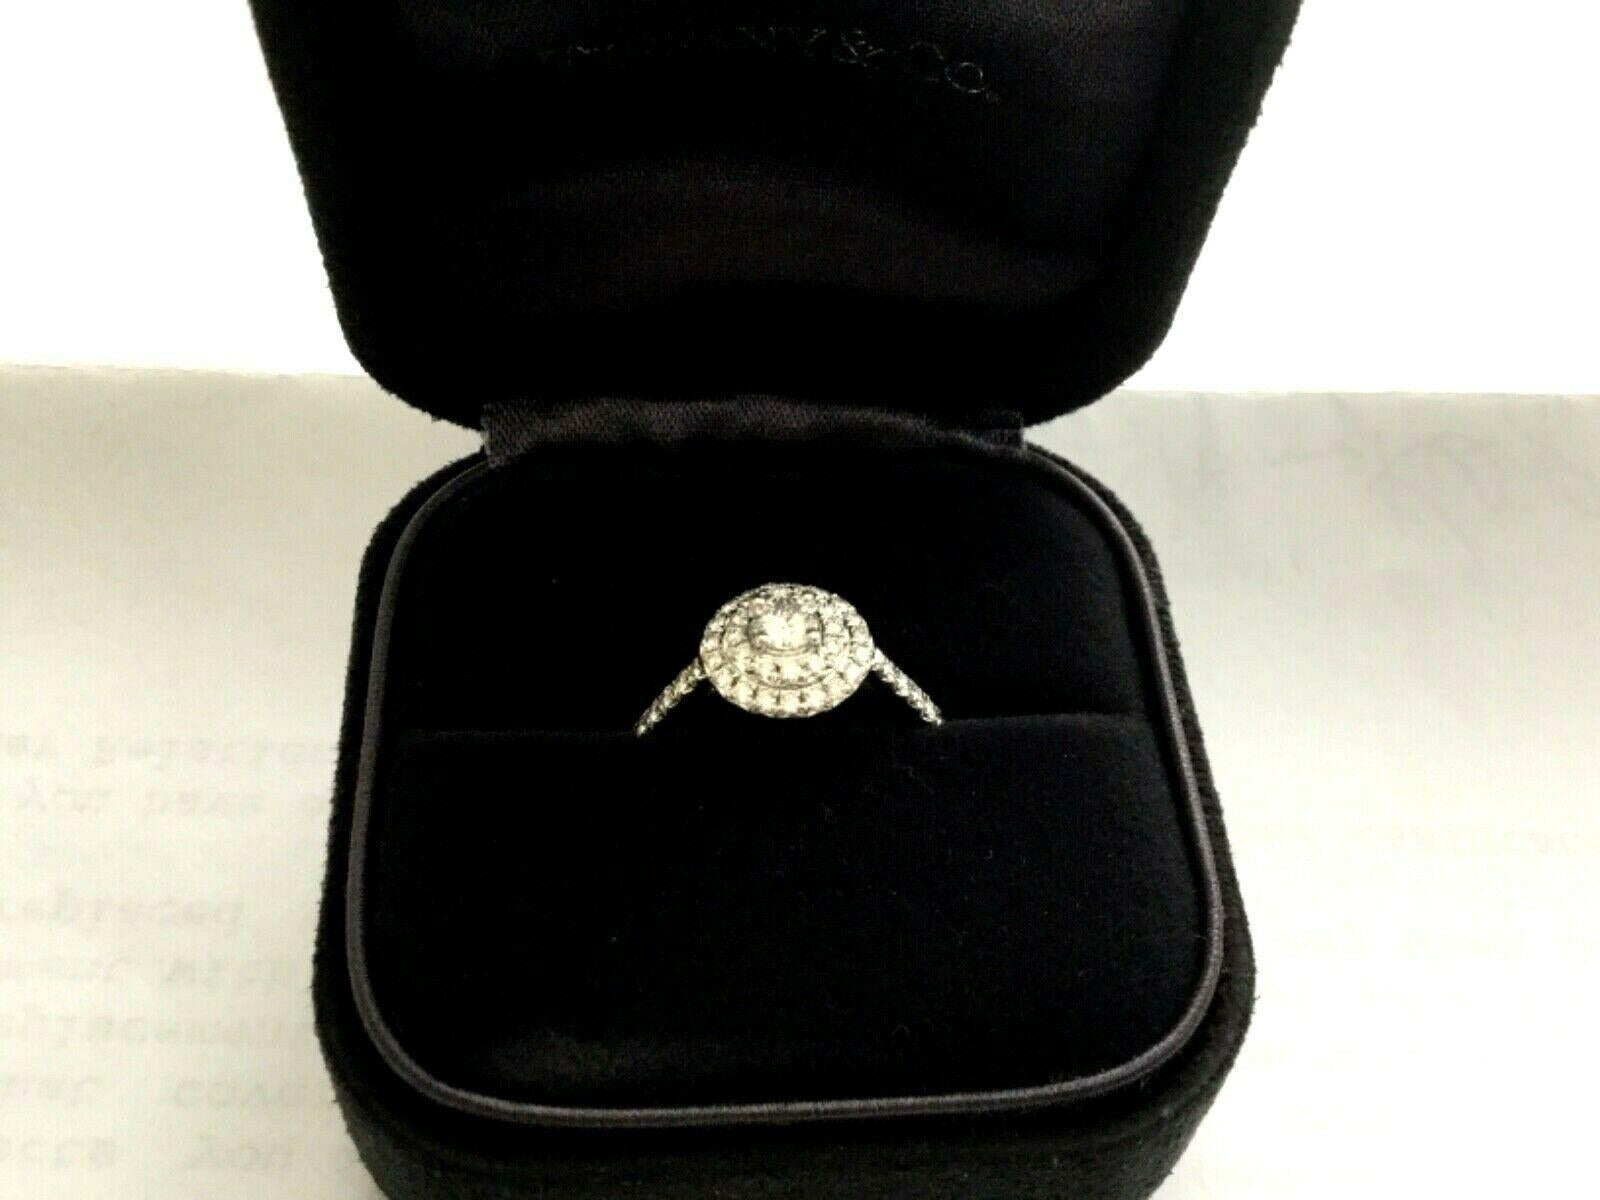 Being offered for your consideration is a like new Tiffany & Co Platinum and Diamond .43 total carat SOLESTE ring  in the classic HALO pave diamond band..  This ring was given as a Christmas gift in 2018 and hardly worn and can pass for a BRAND NEW